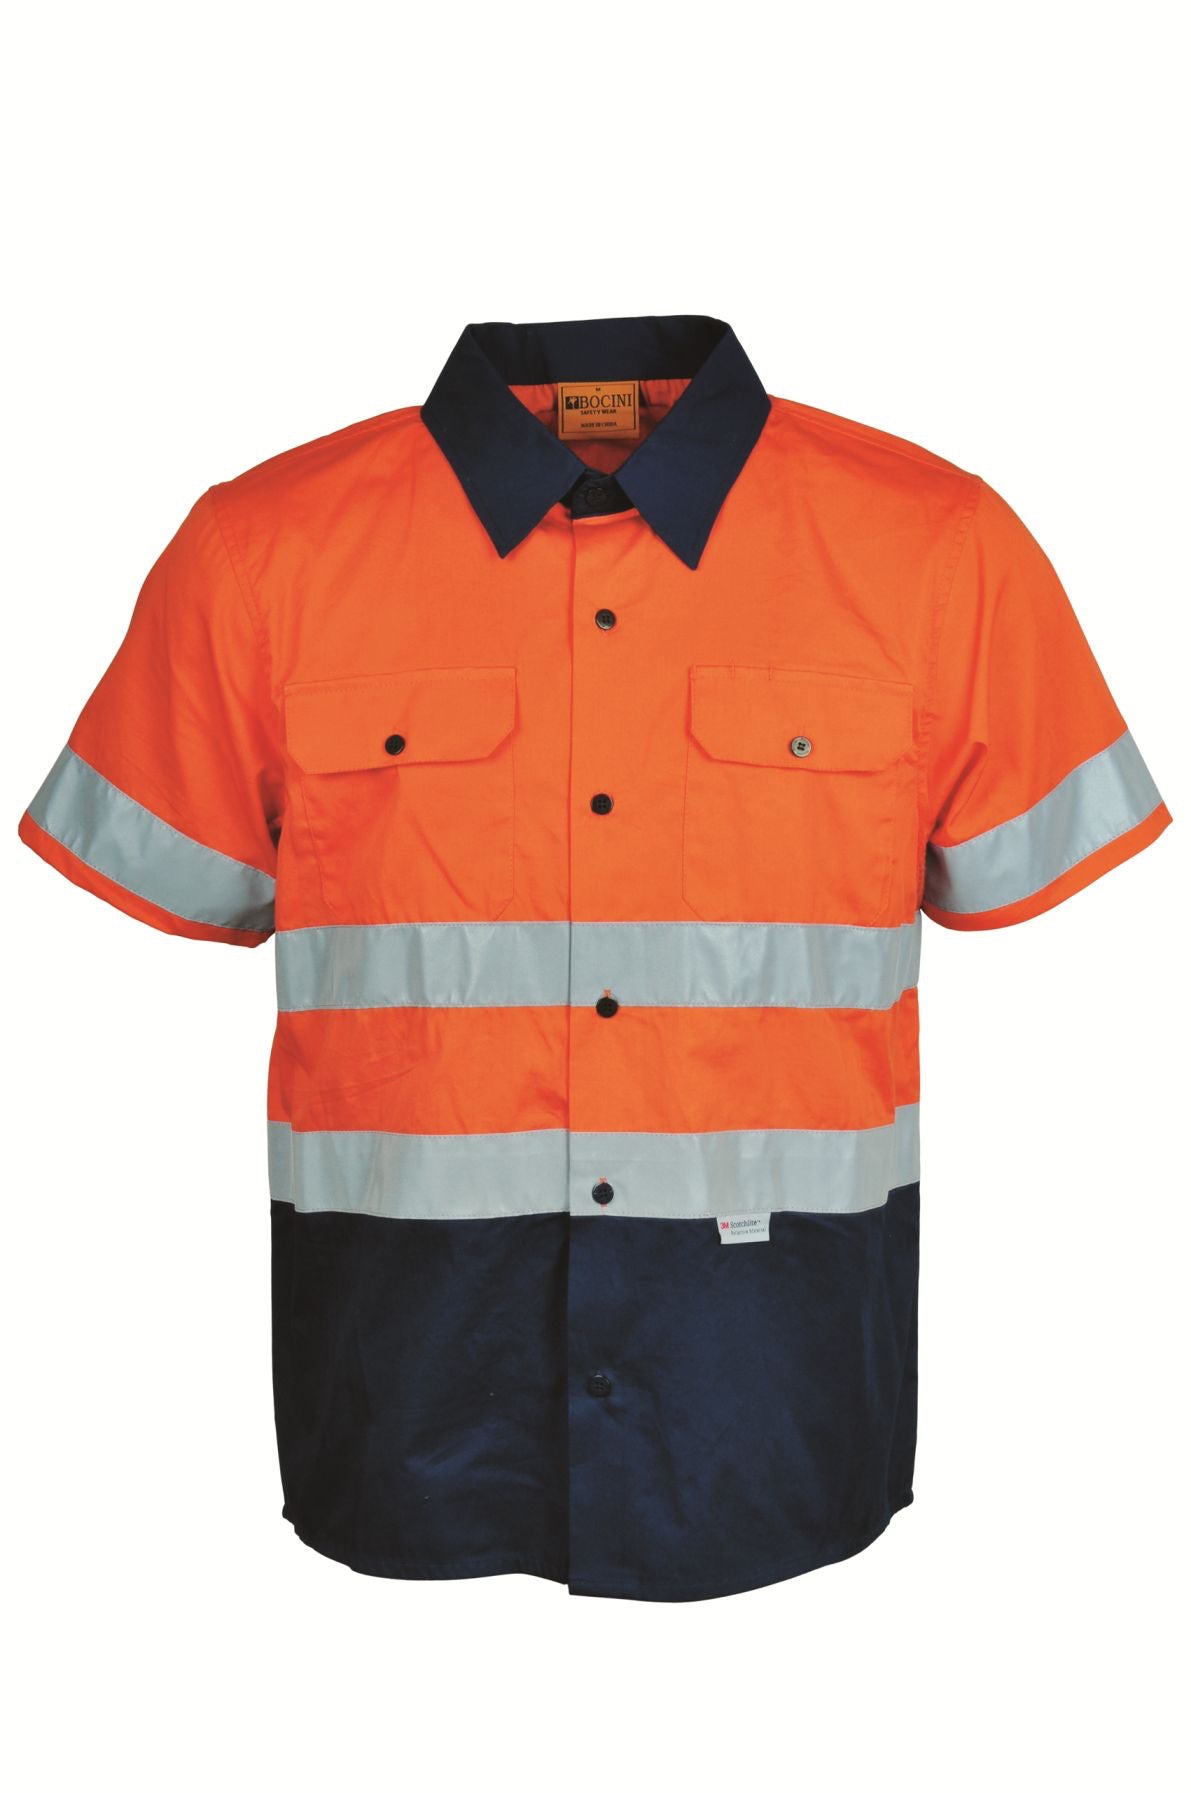 Bocini-Unisex Adults Hi-Vis S/S Cotton Drill Shirt With Reflective Tape-SS1231